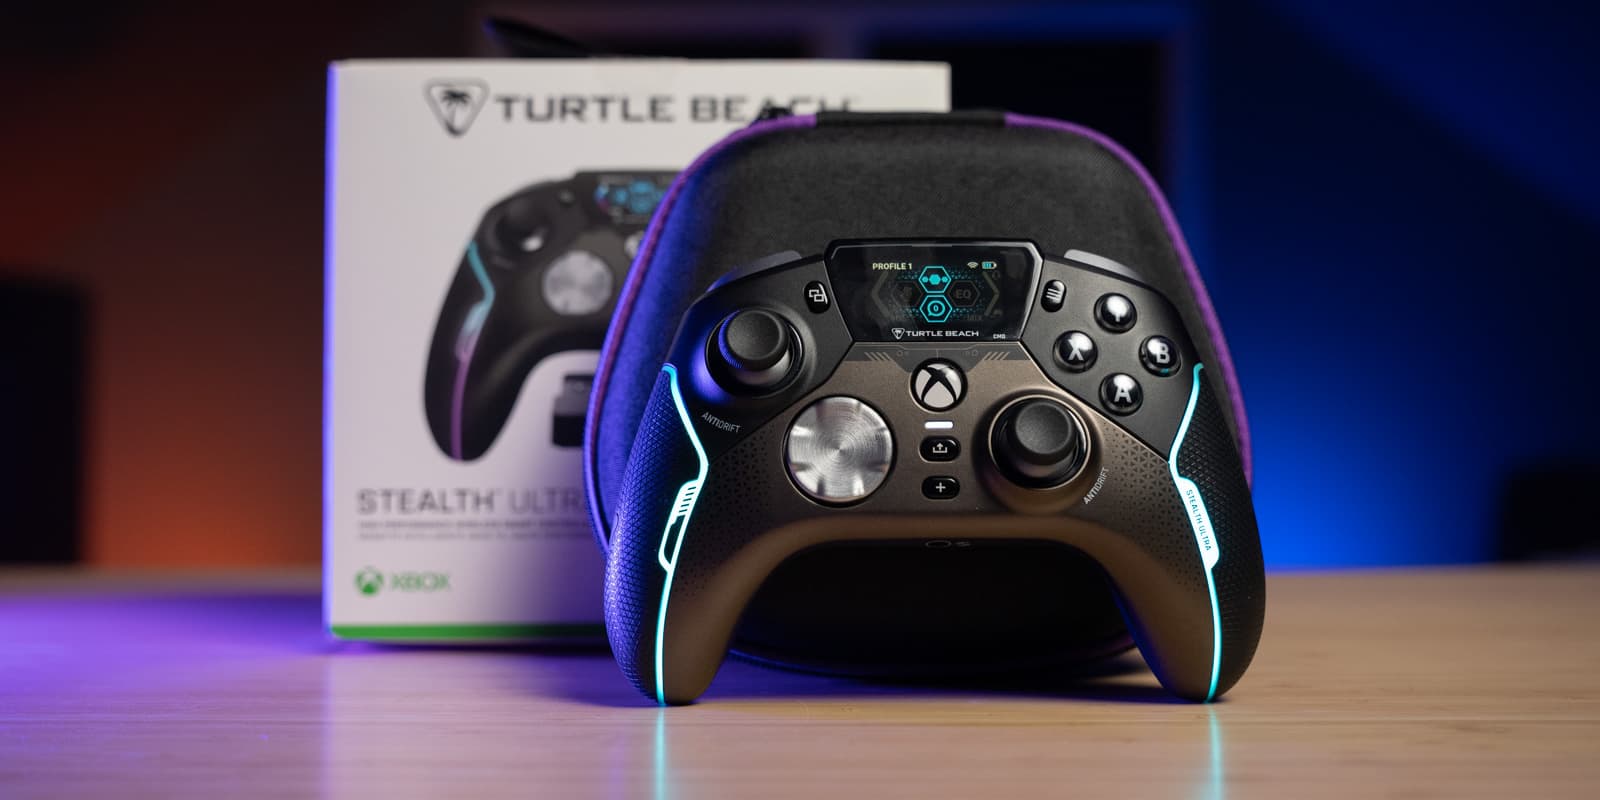 Stealth Ultra is the premium Xbox controller you've been waiting for